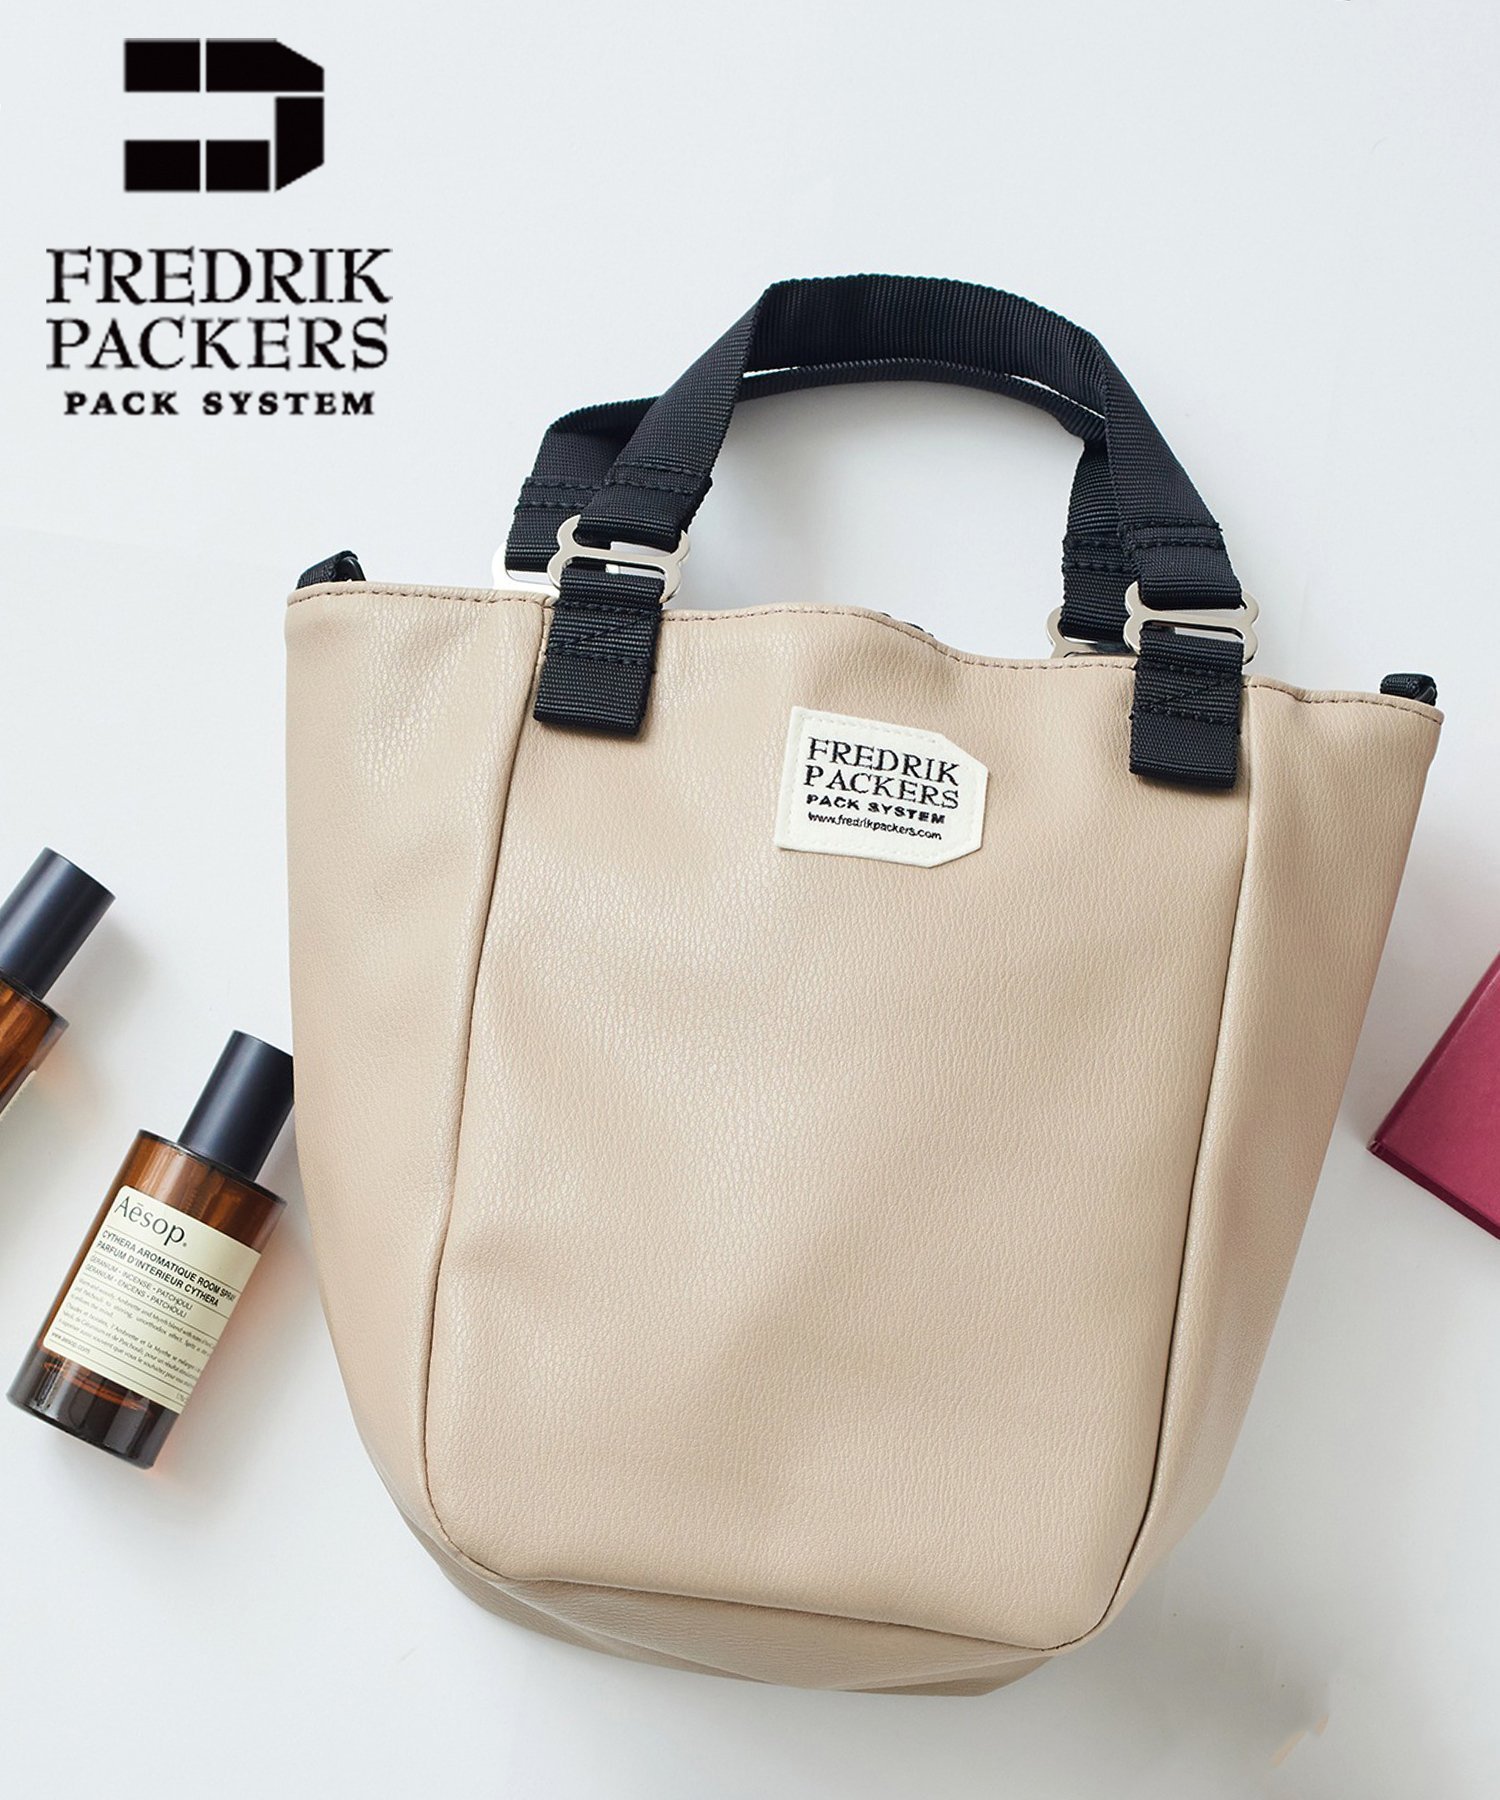 FREDRIK PACKERS オールシーズン・オールシーン活躍のミニトート◎ MISSION TOTE XS ECO LEATHER limited  A4ドキュメントや13inch以下のノートPCが収納可能 フレドリックパッカーズ